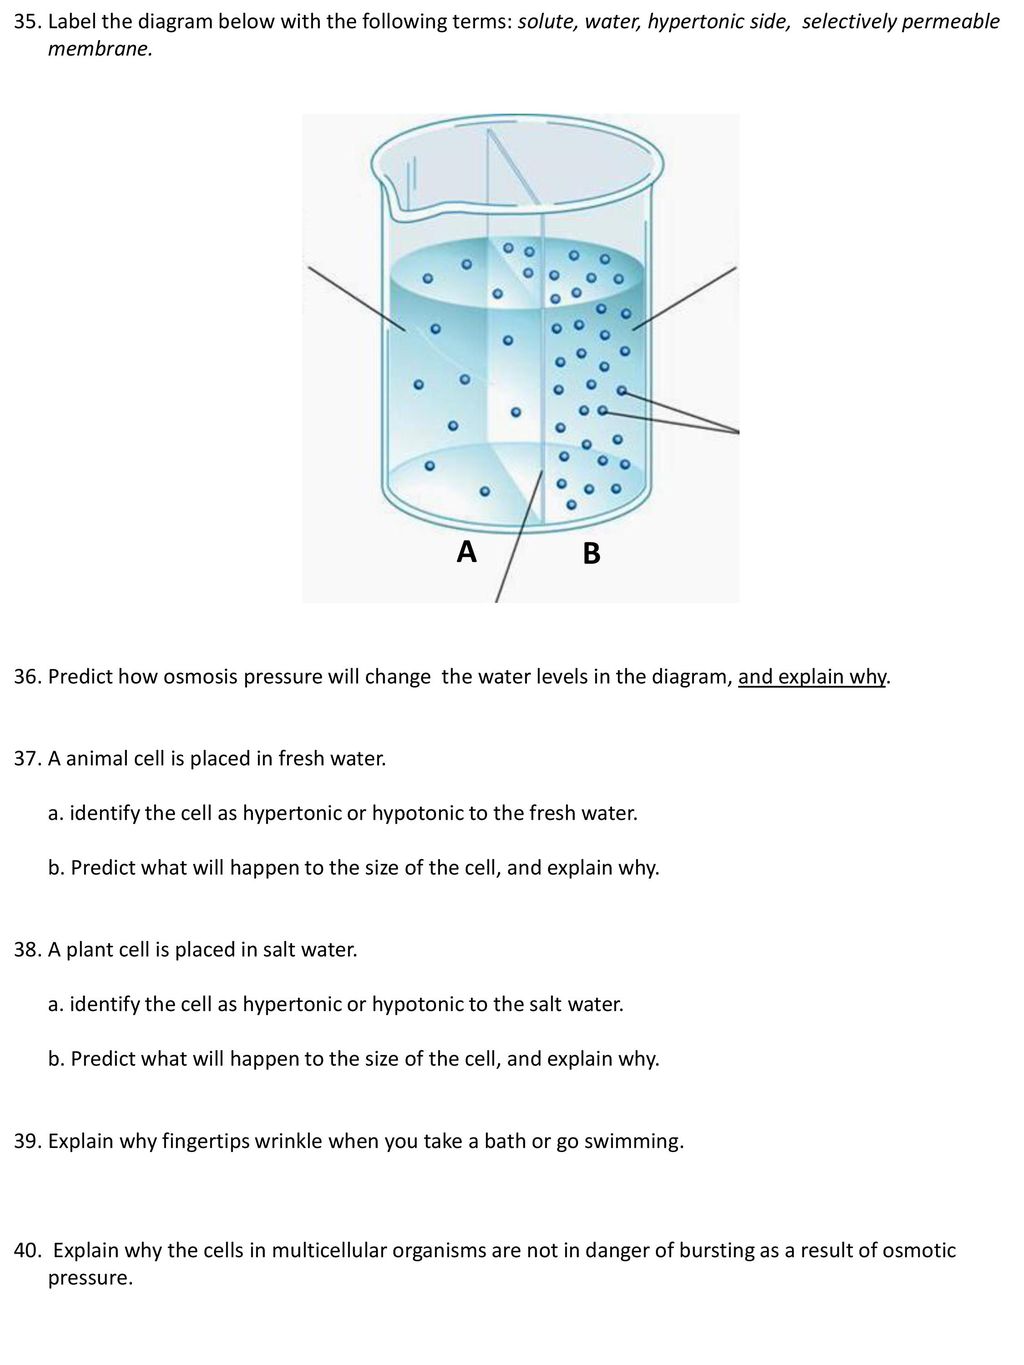 35. Label the diagram below with the following terms: solute, water, hypertonic side, selectively permeable membrane.